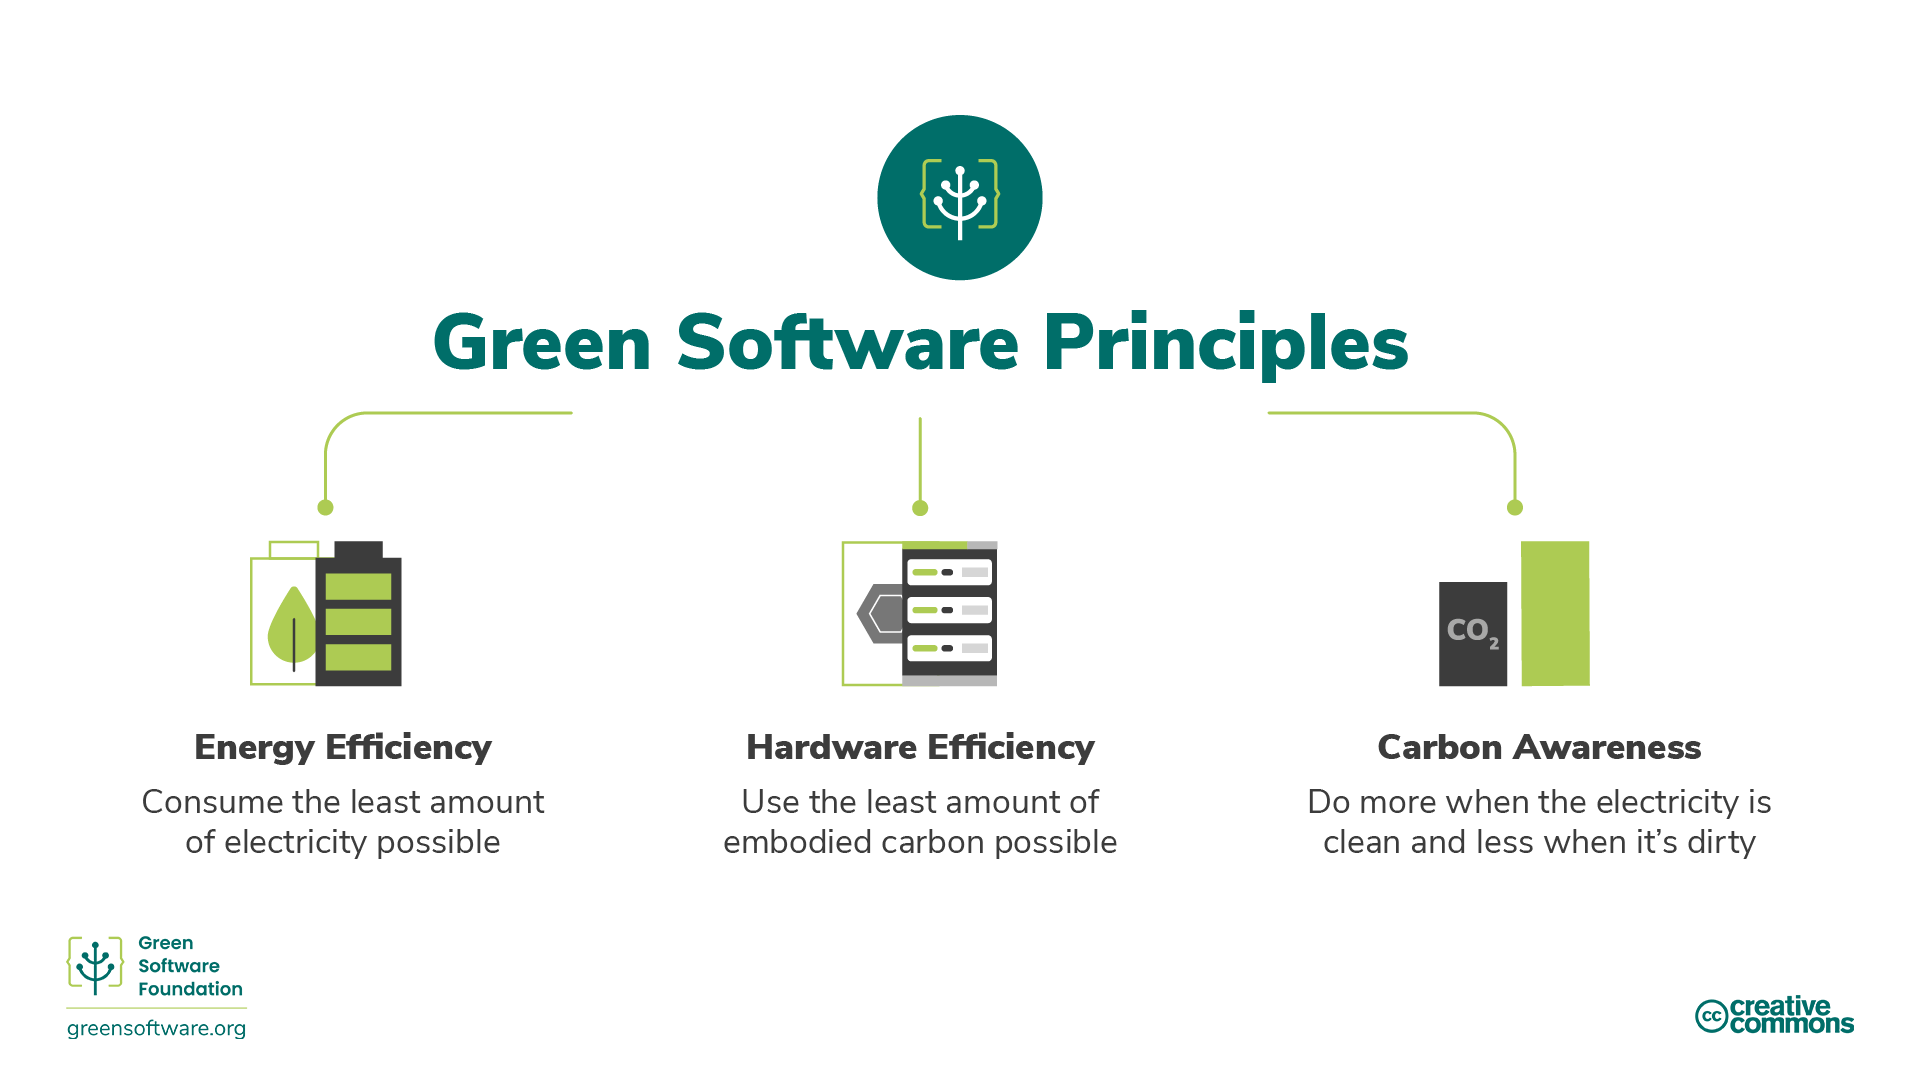 Illustration of how green software divides to energy efficiency, hardware efficiency and carbon awareness